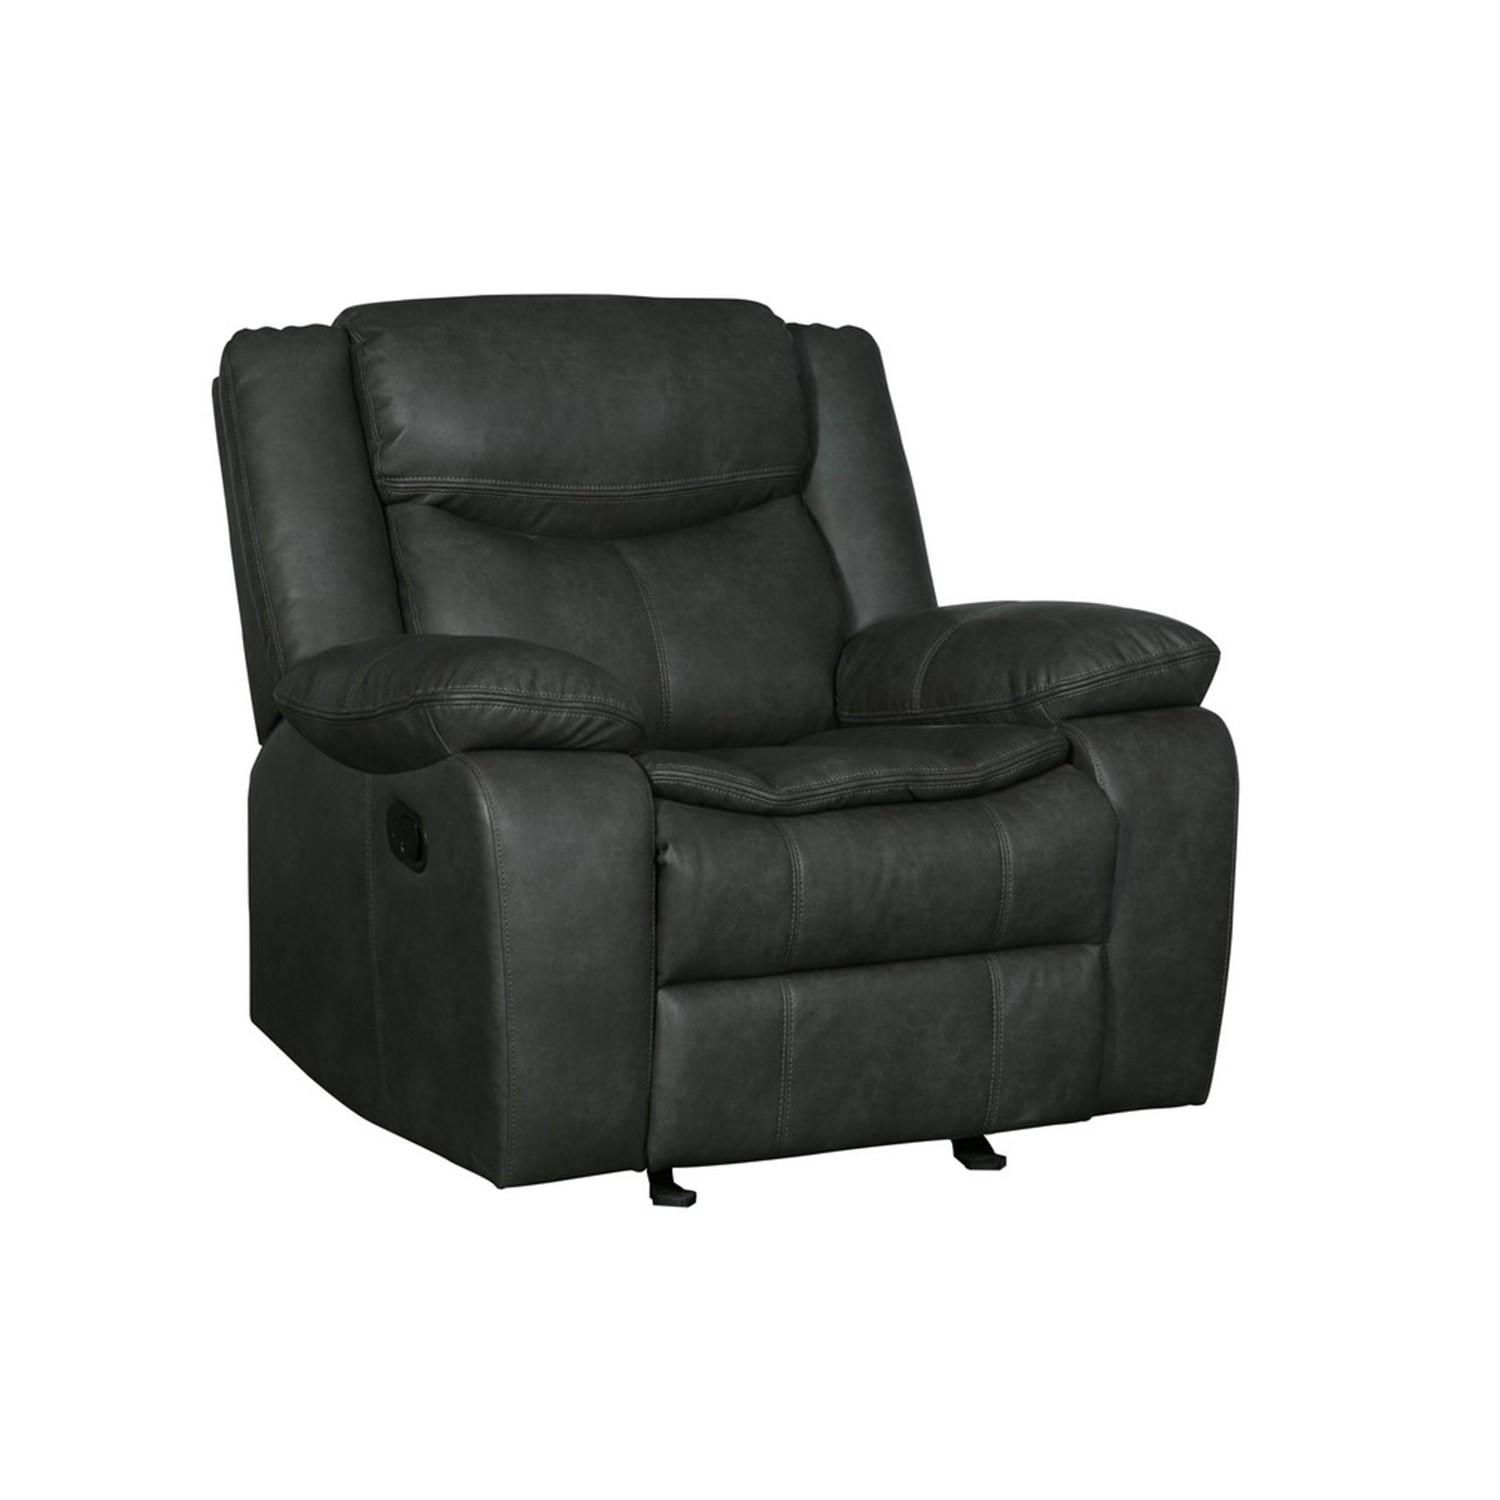 

    
Contemporary Gray Leather Air Reclining Chair Global United 6967 6967-GRAY-CH
